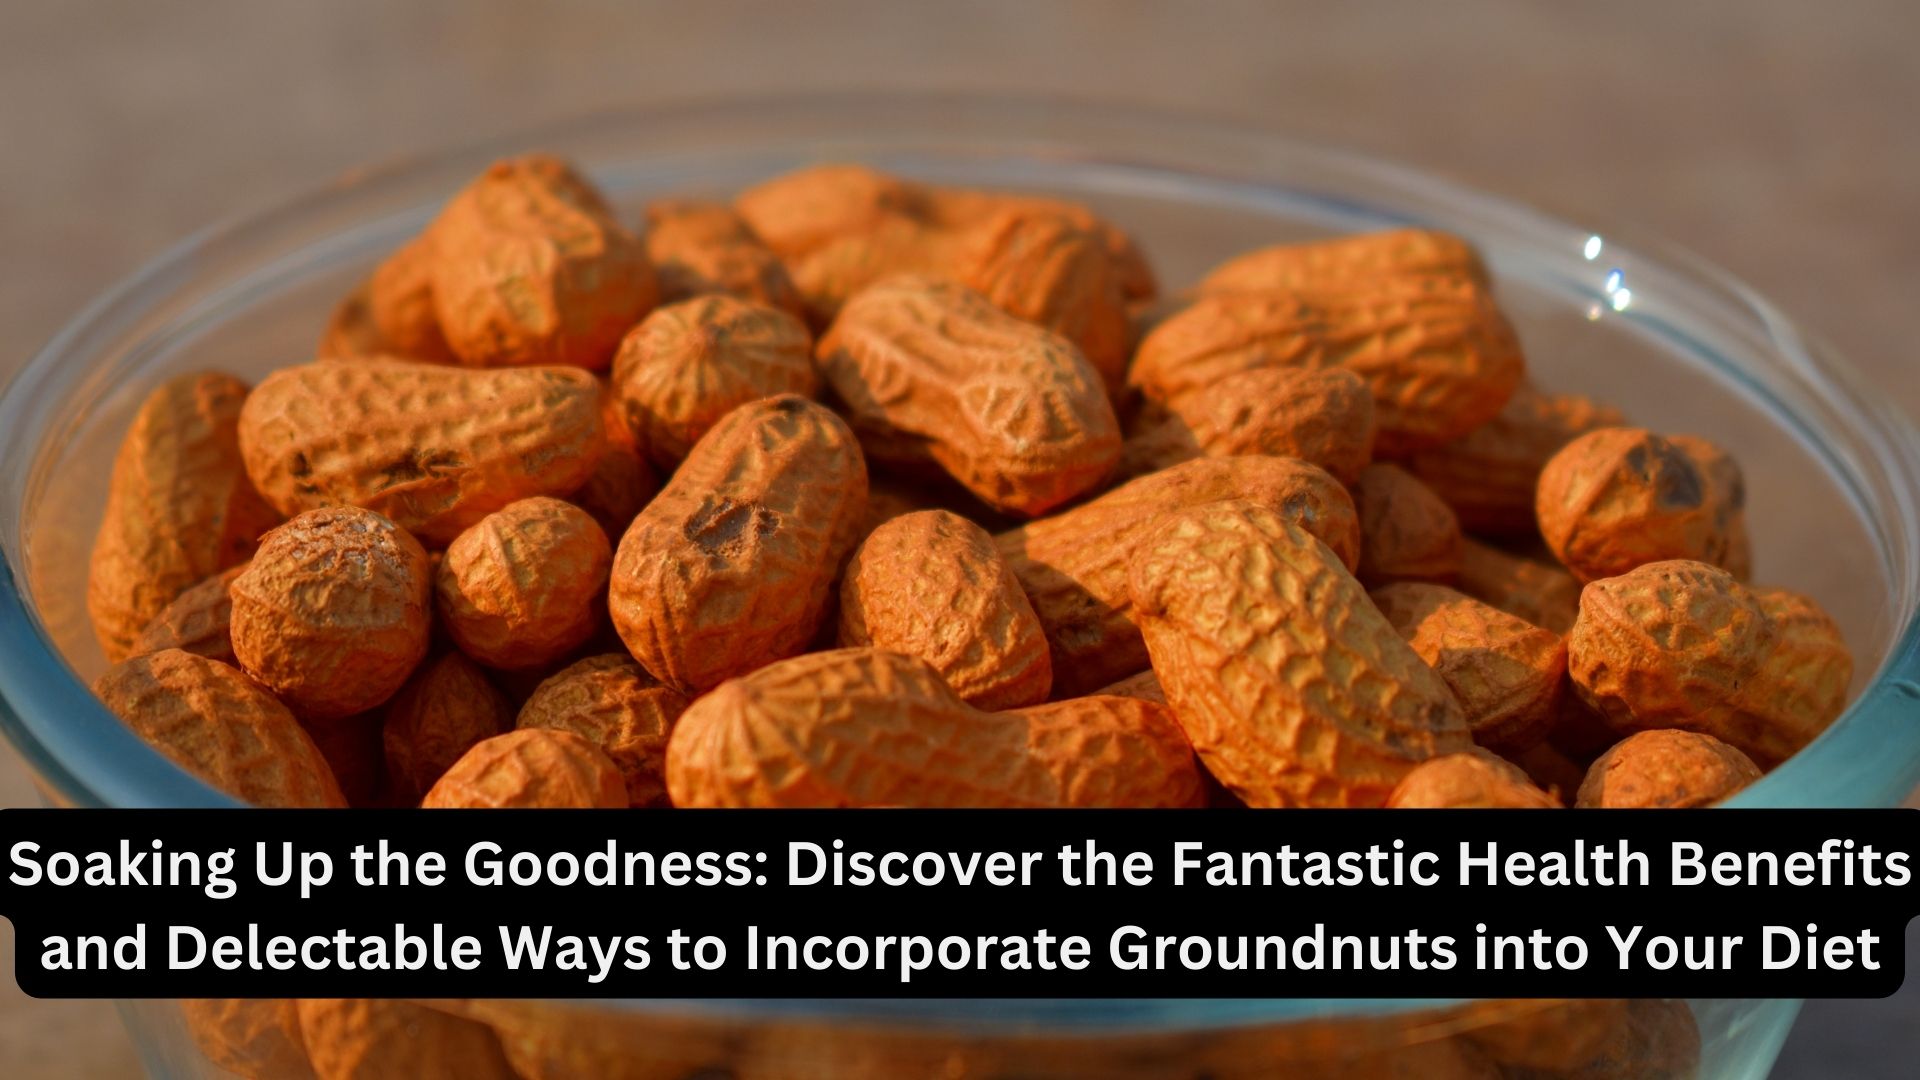 Soaking Up the Goodness: Discover the Fantastic Health Benefits and Delectable Ways to Incorporate Groundnuts into Your Diet